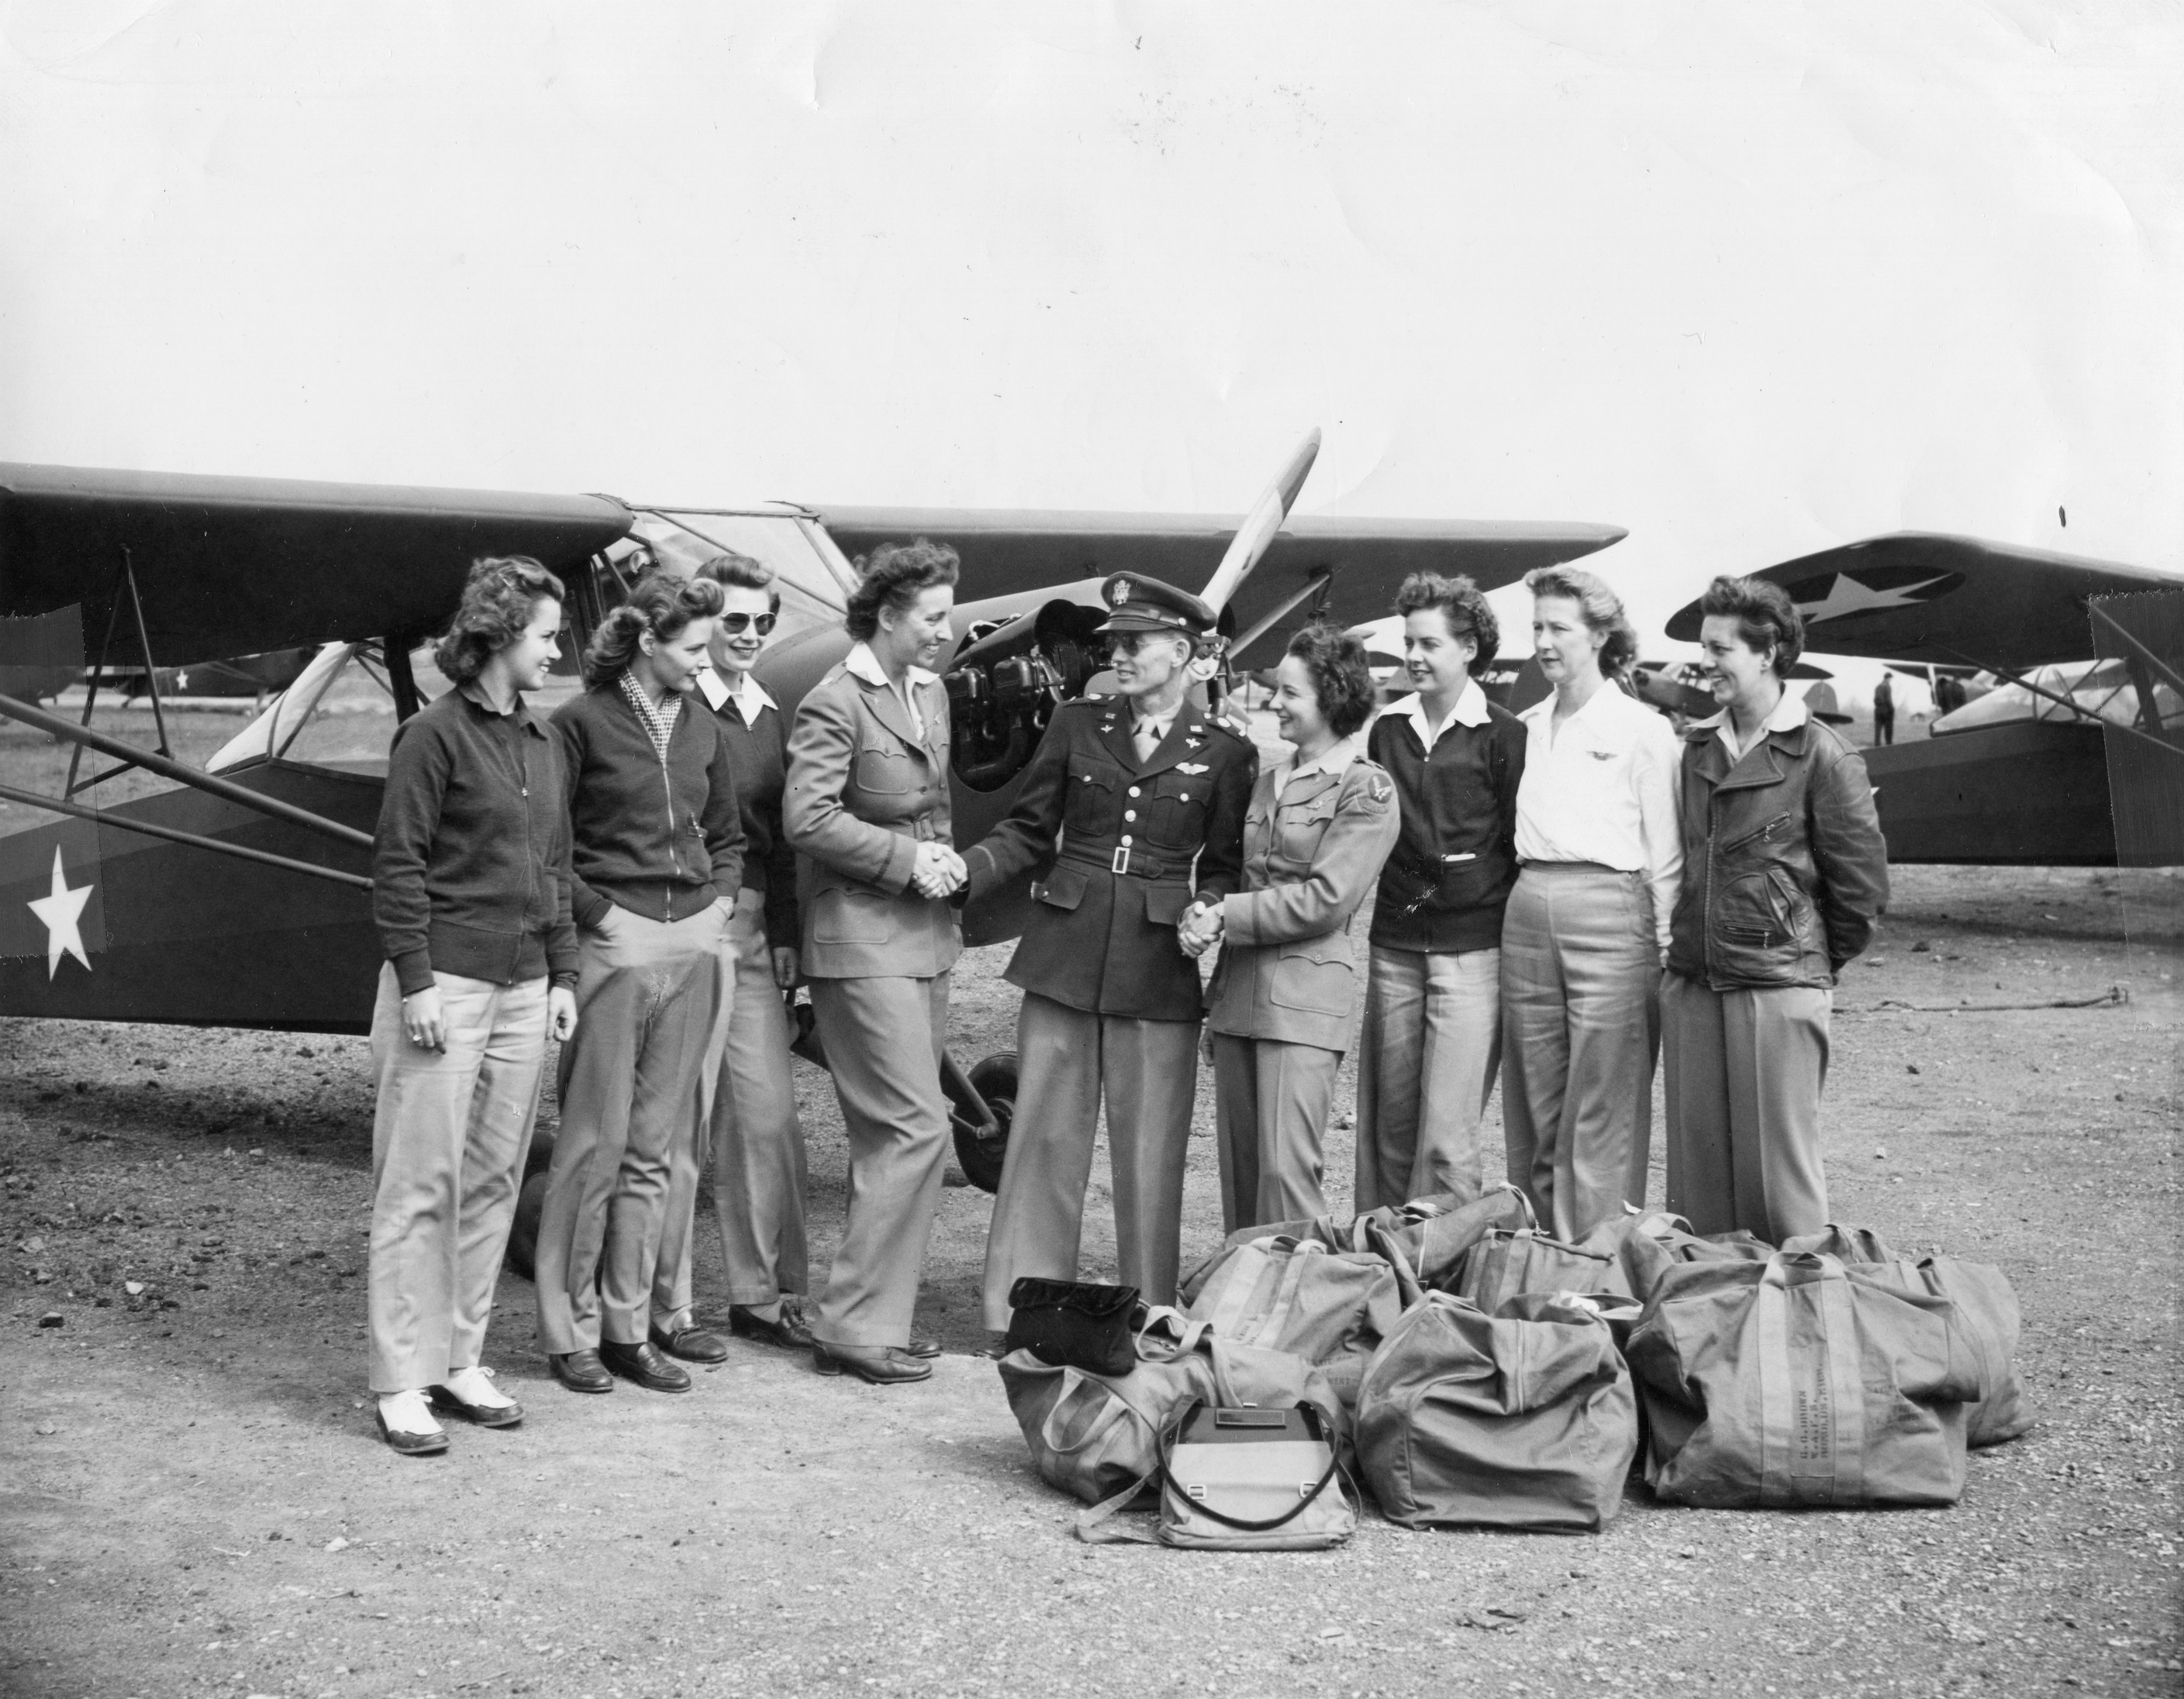 American military commander Lt. George Fairfield (center) shakes hands with Women's Air Force Service Pilot (WASP), and former Olympic swimming champion, Katherine Rawls Thompson (fourth left), and another unidentified pilot, as they are watched by six additional WASPs, all of whom had flown L-2 'Grasshopper' liaison planes to various Army bases from the Taylorcraft factory, Alliance, Ohio, in June 1943. (PhotoQuest—Getty Images)